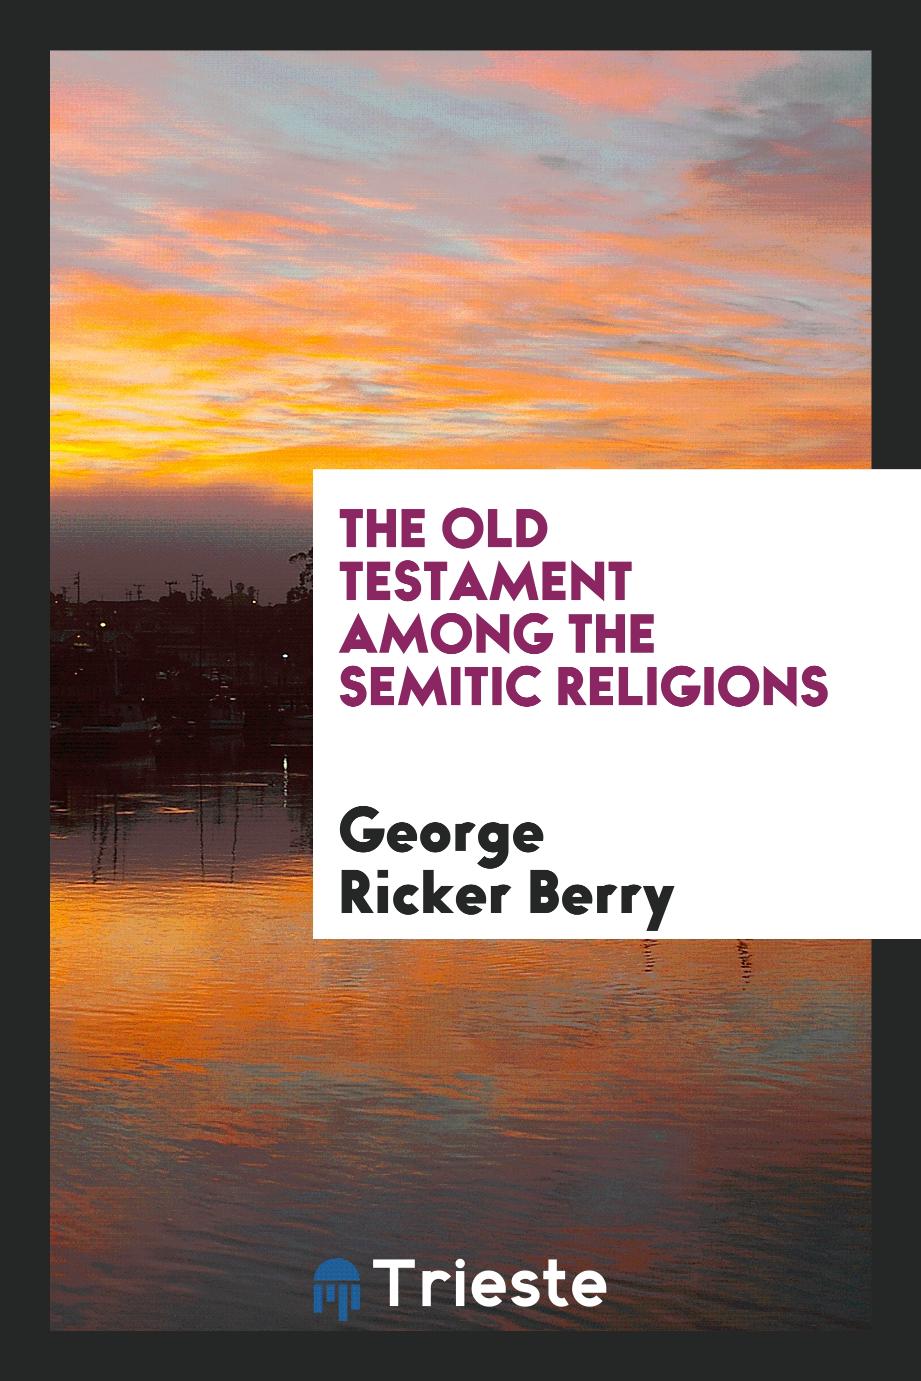 The Old Testament among the Semitic religions